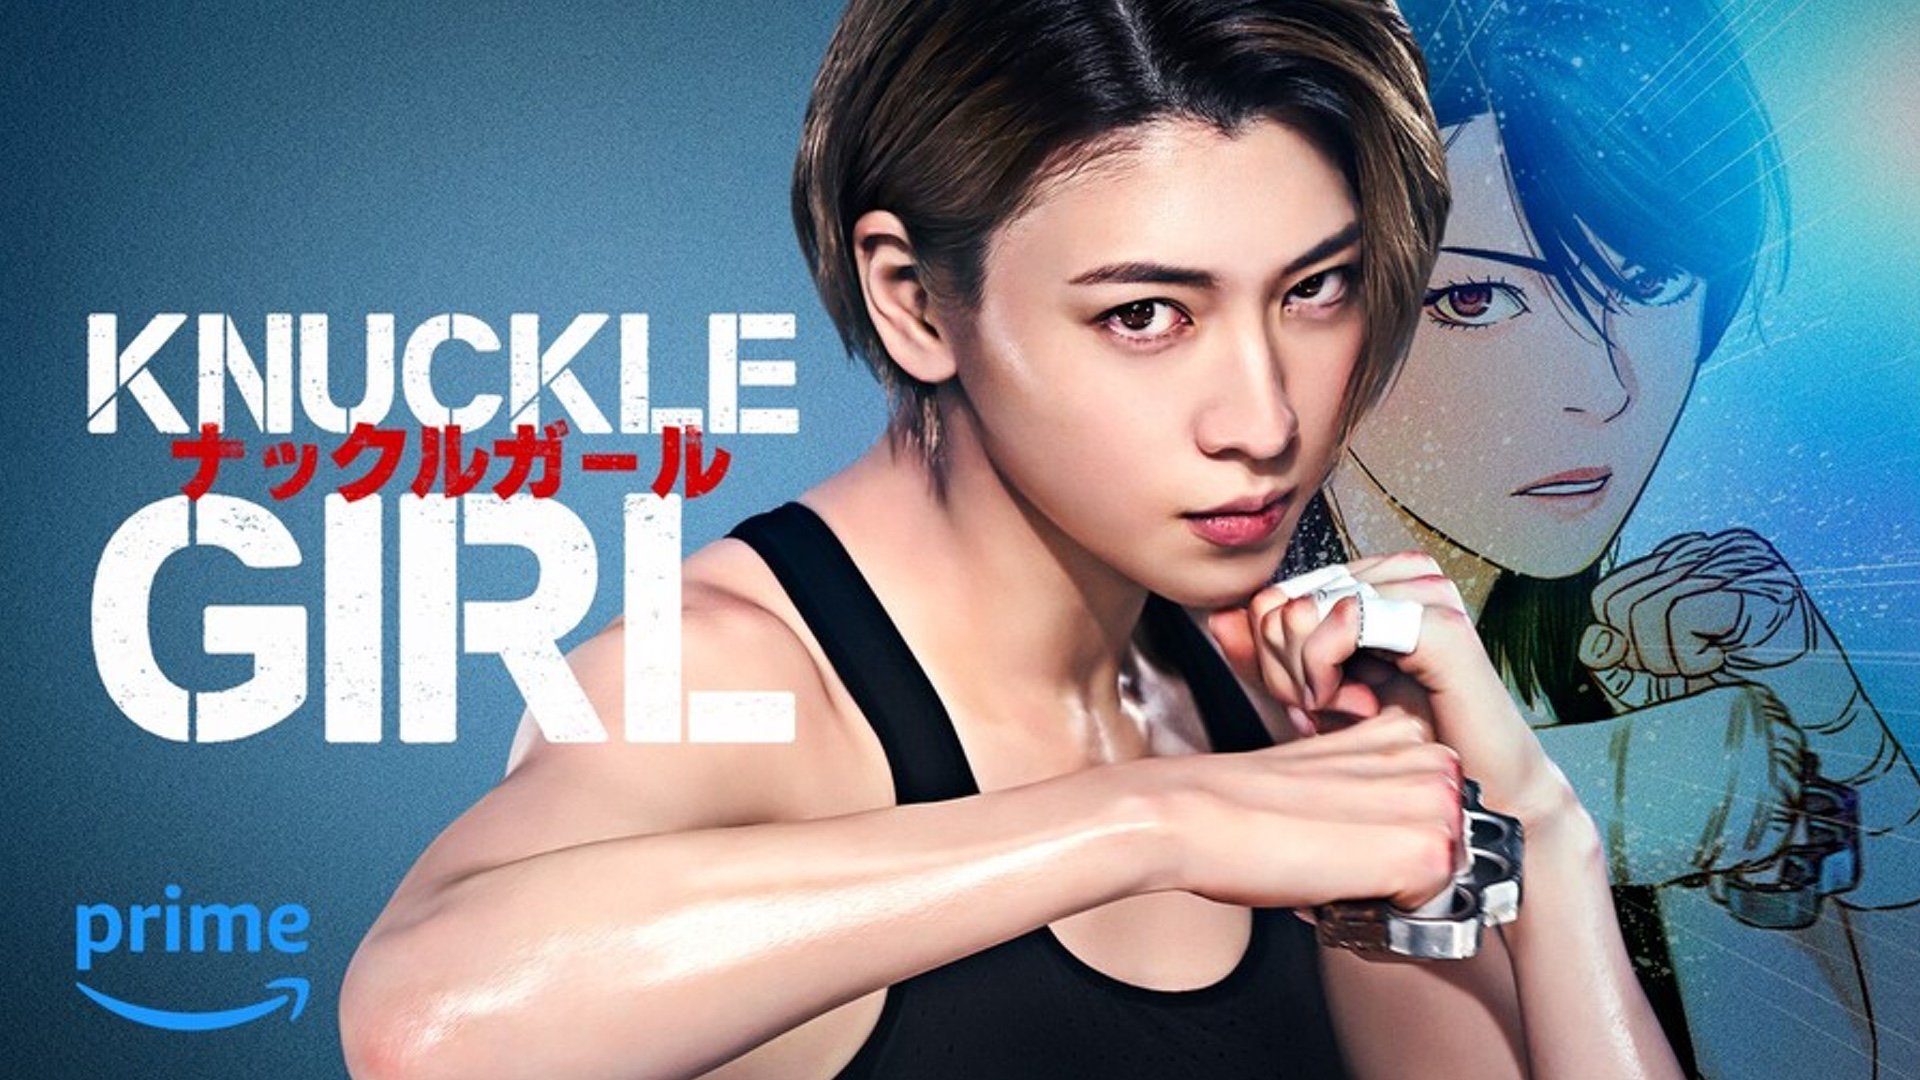 'Knuckle Girl' Arriva il liveaction Taxidrivers.it